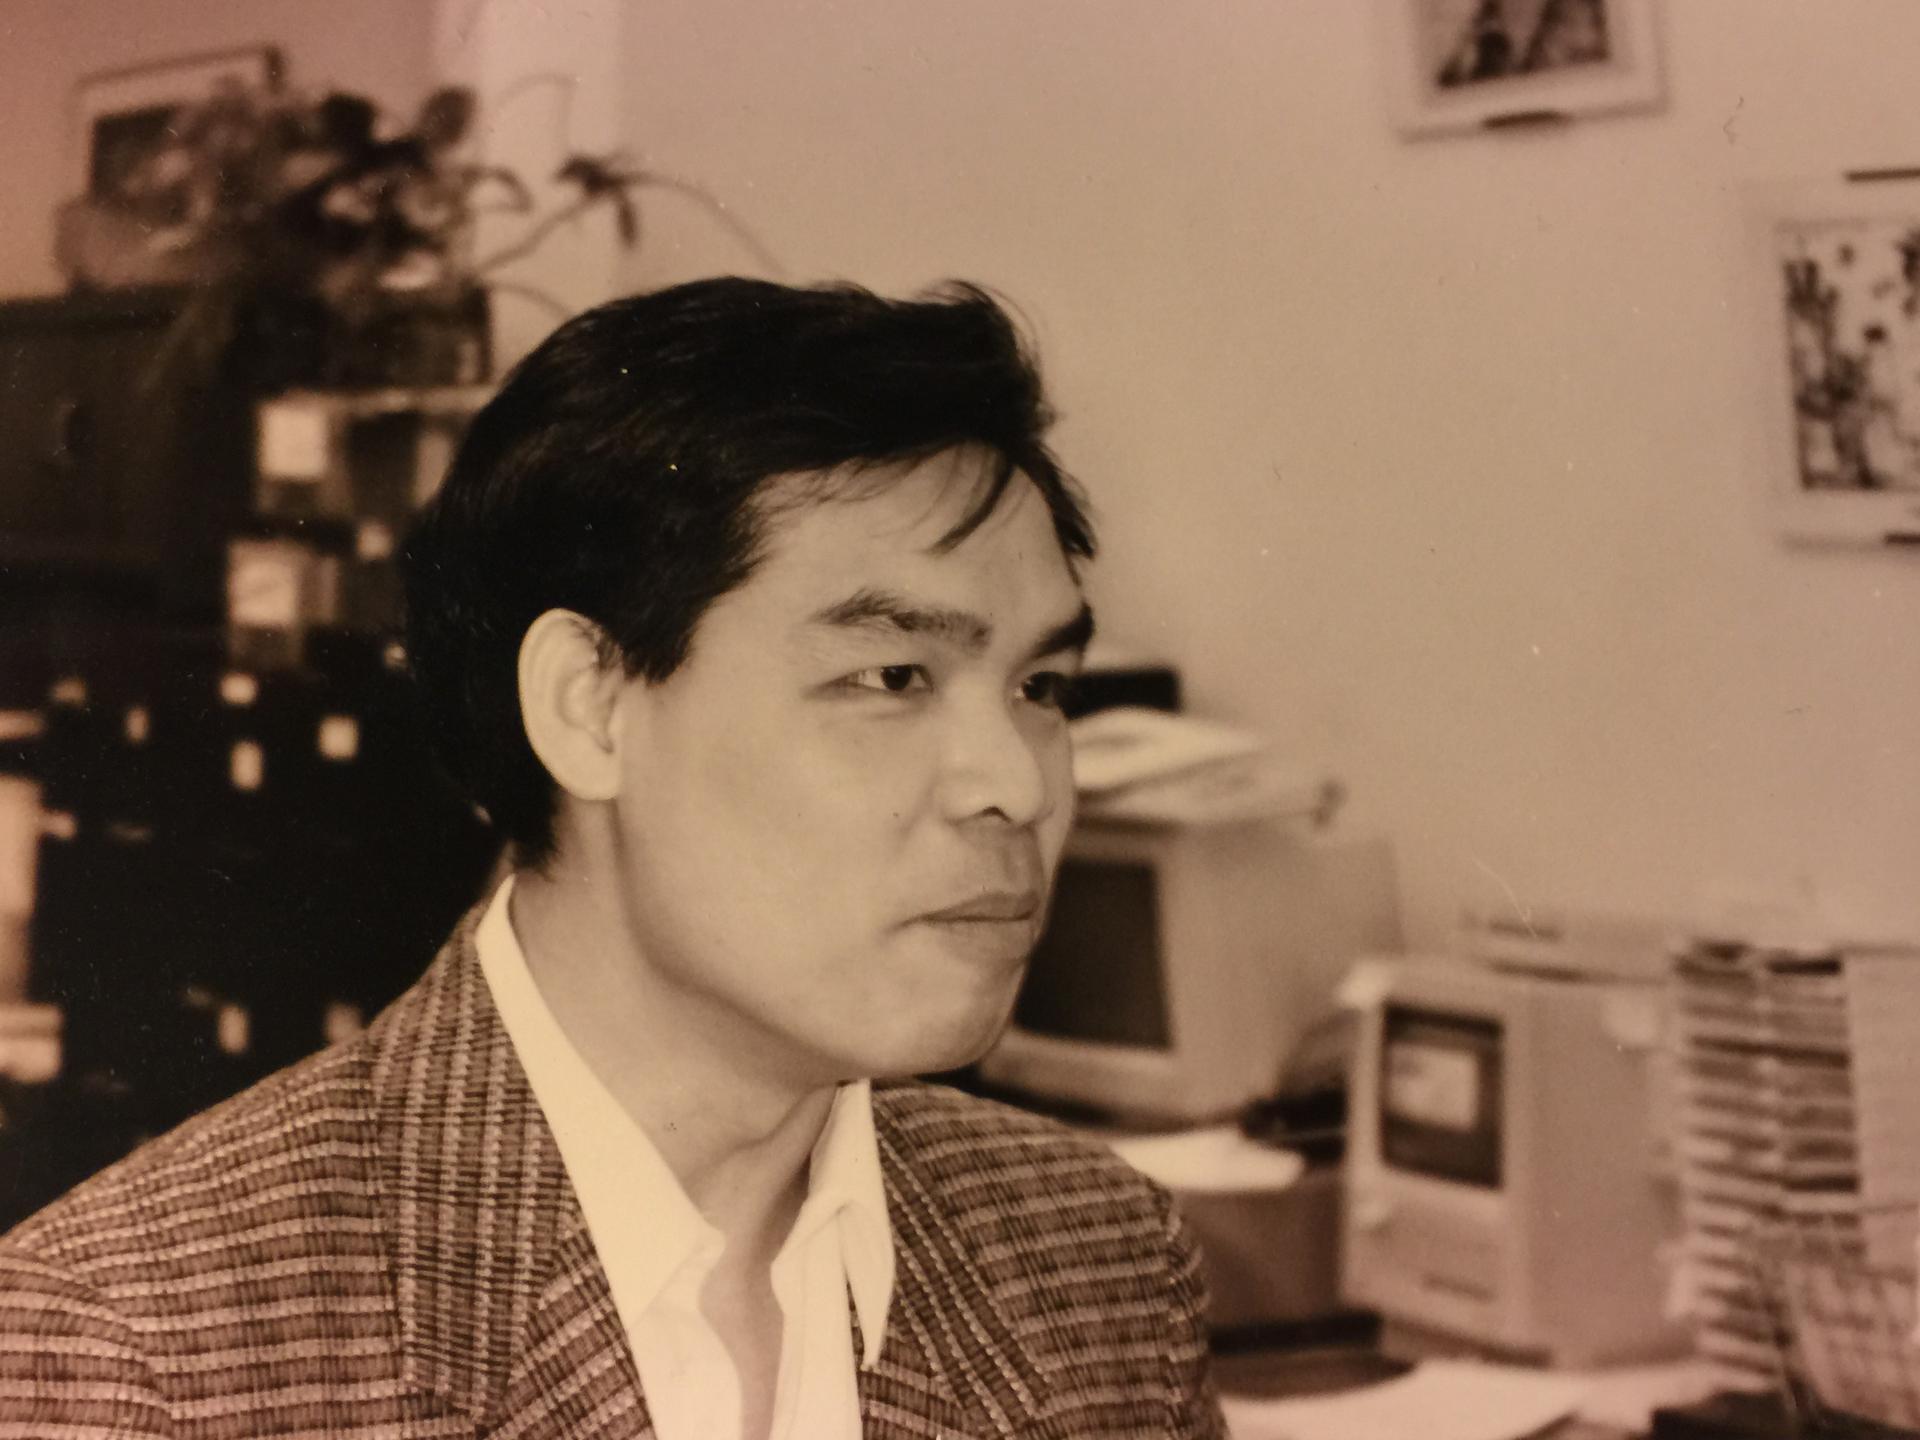 Sepia-tone image of man in jacket, profile photo, in front of 1980s computers